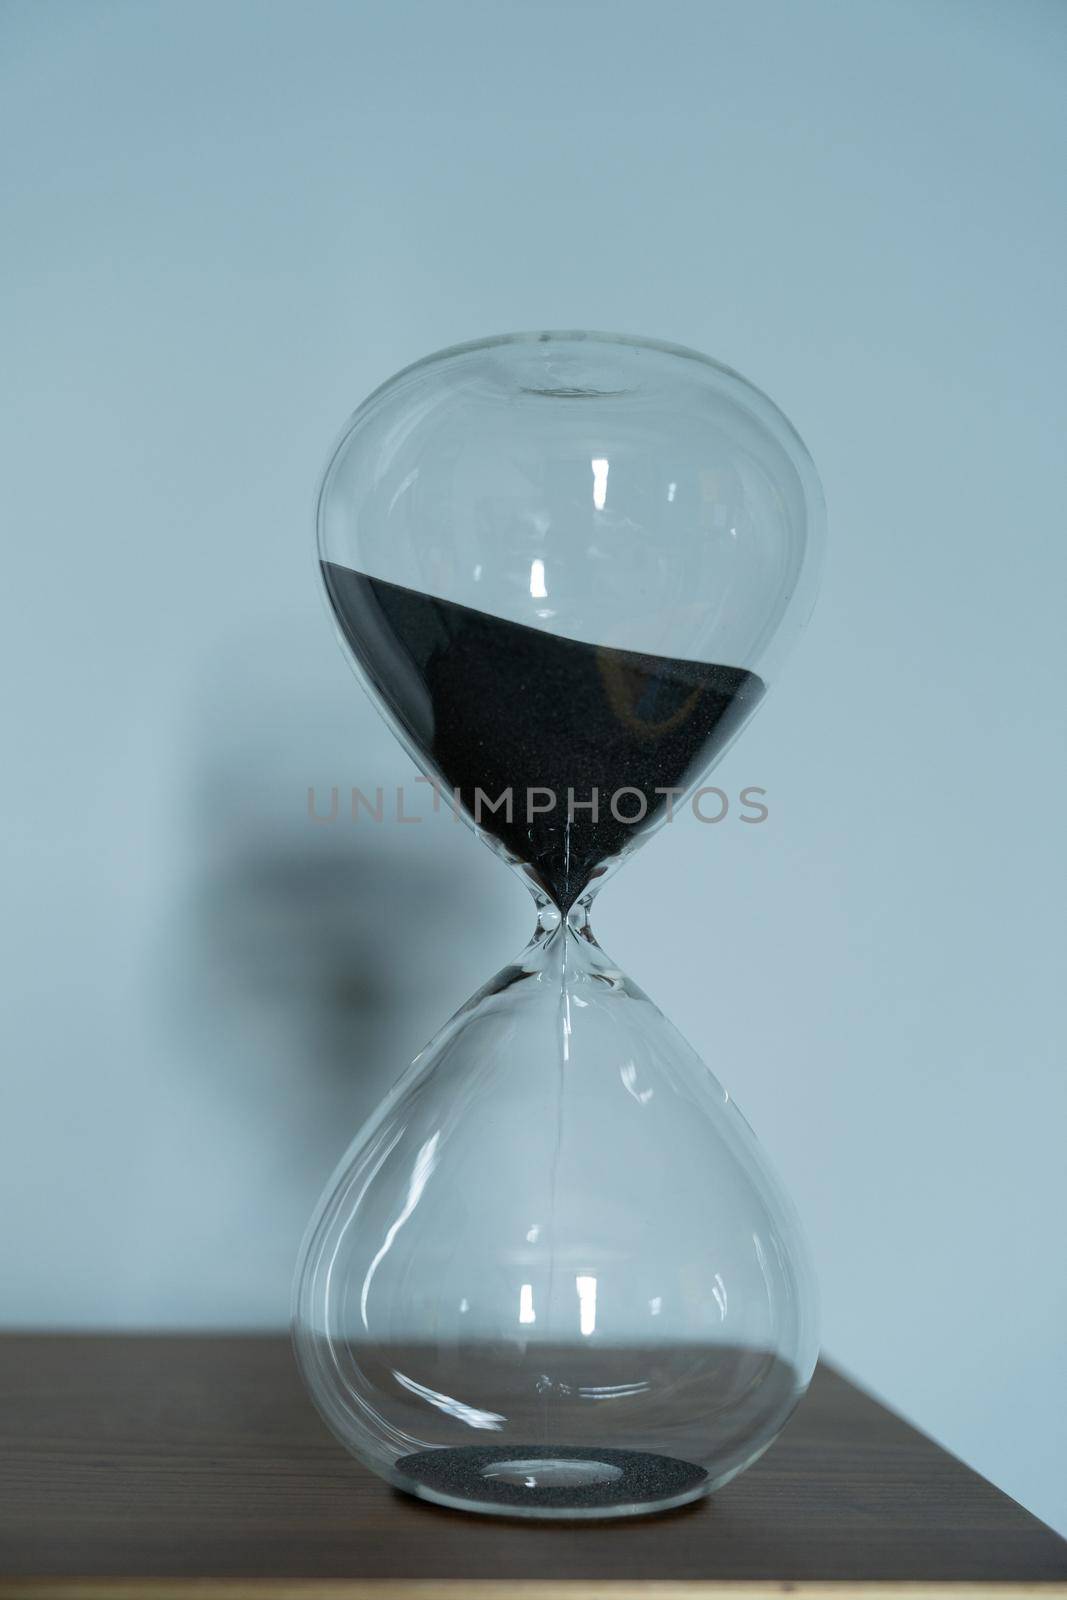 Black sand running through the bulbs of an hourglass measuring the passing time in a countdown to a business deadline, urgency and running out of time on a blue background with copy space. by LeoniekvanderVliet